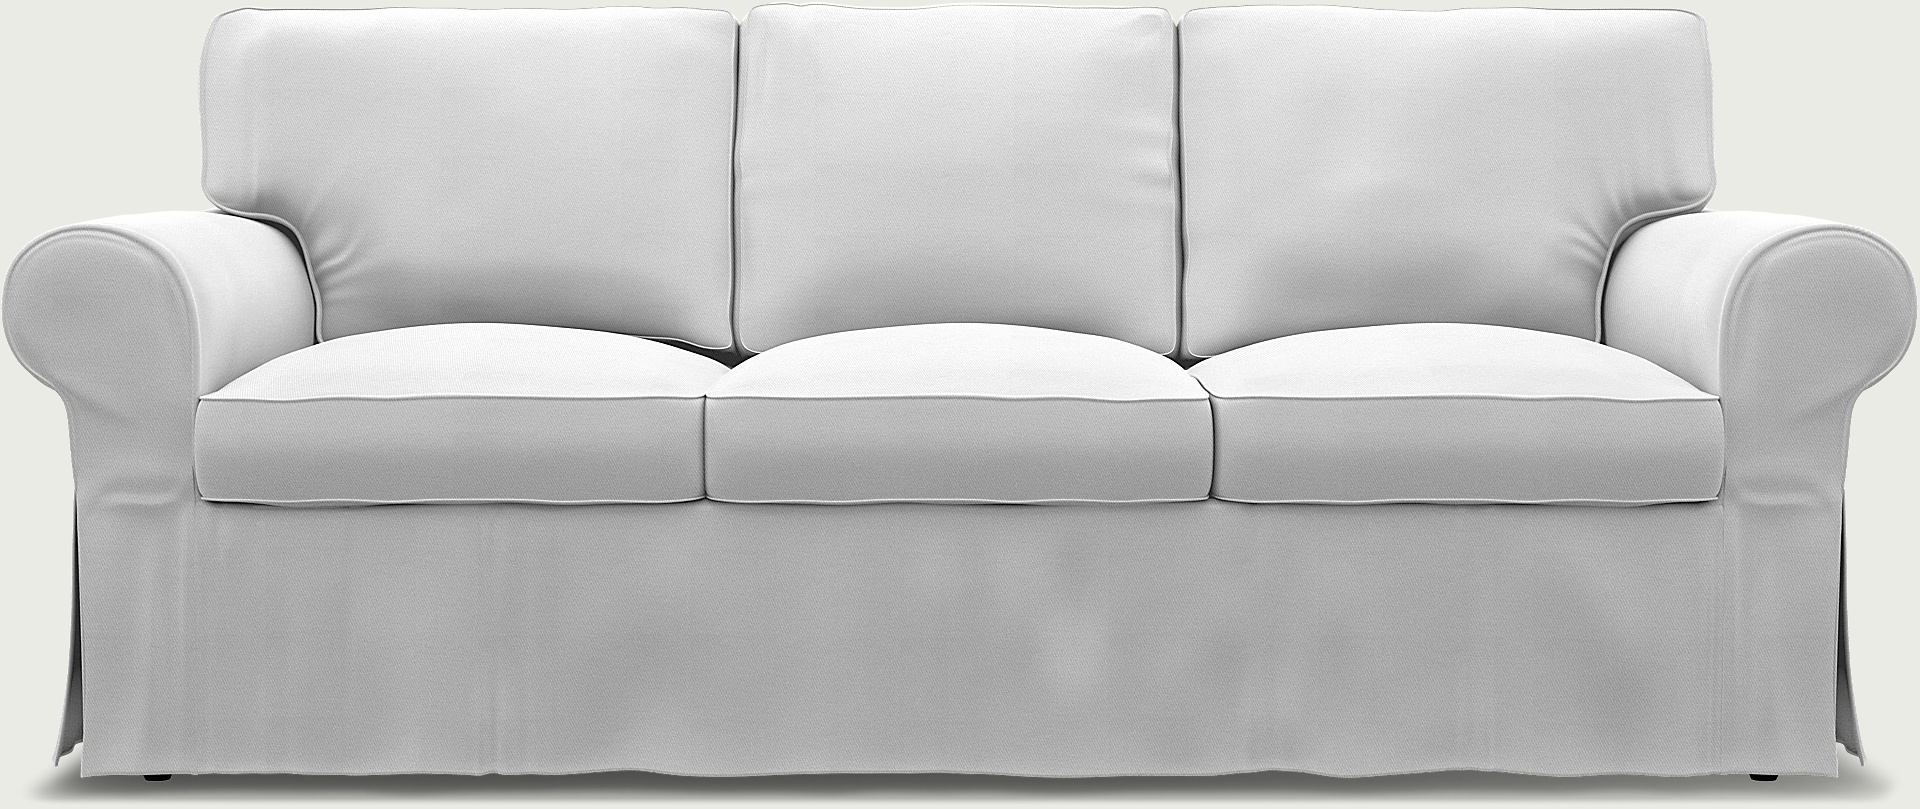 Ikea Rp 3 Seater Sofa Cover With, How Many Meters To Cover A 3 Seater Sofa